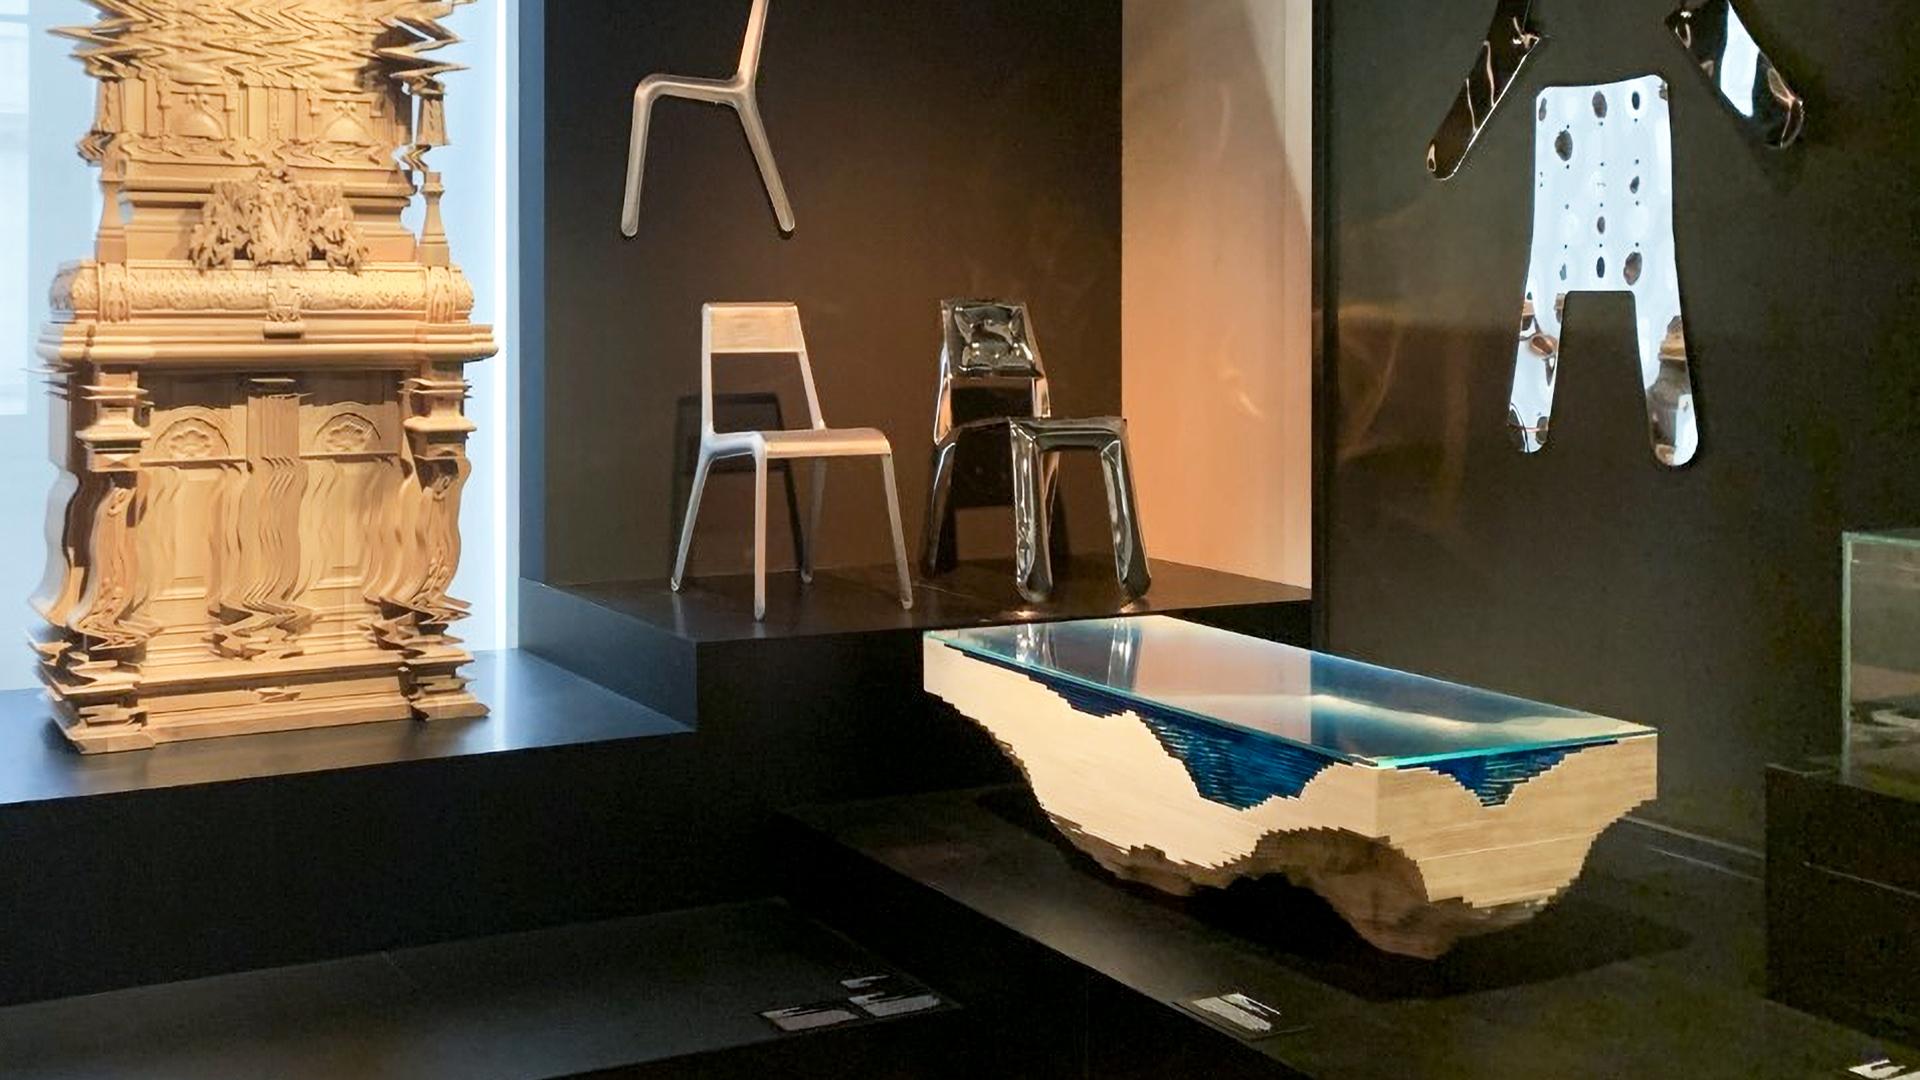 Abyss is a unique, modern coffee table design from British designer Christopher Duffy.  As much art furniture as traditional furniture piece.

Duffy casts an eye downwards – looking to the depths of the ocean to dream up a dramatic new coffee table,